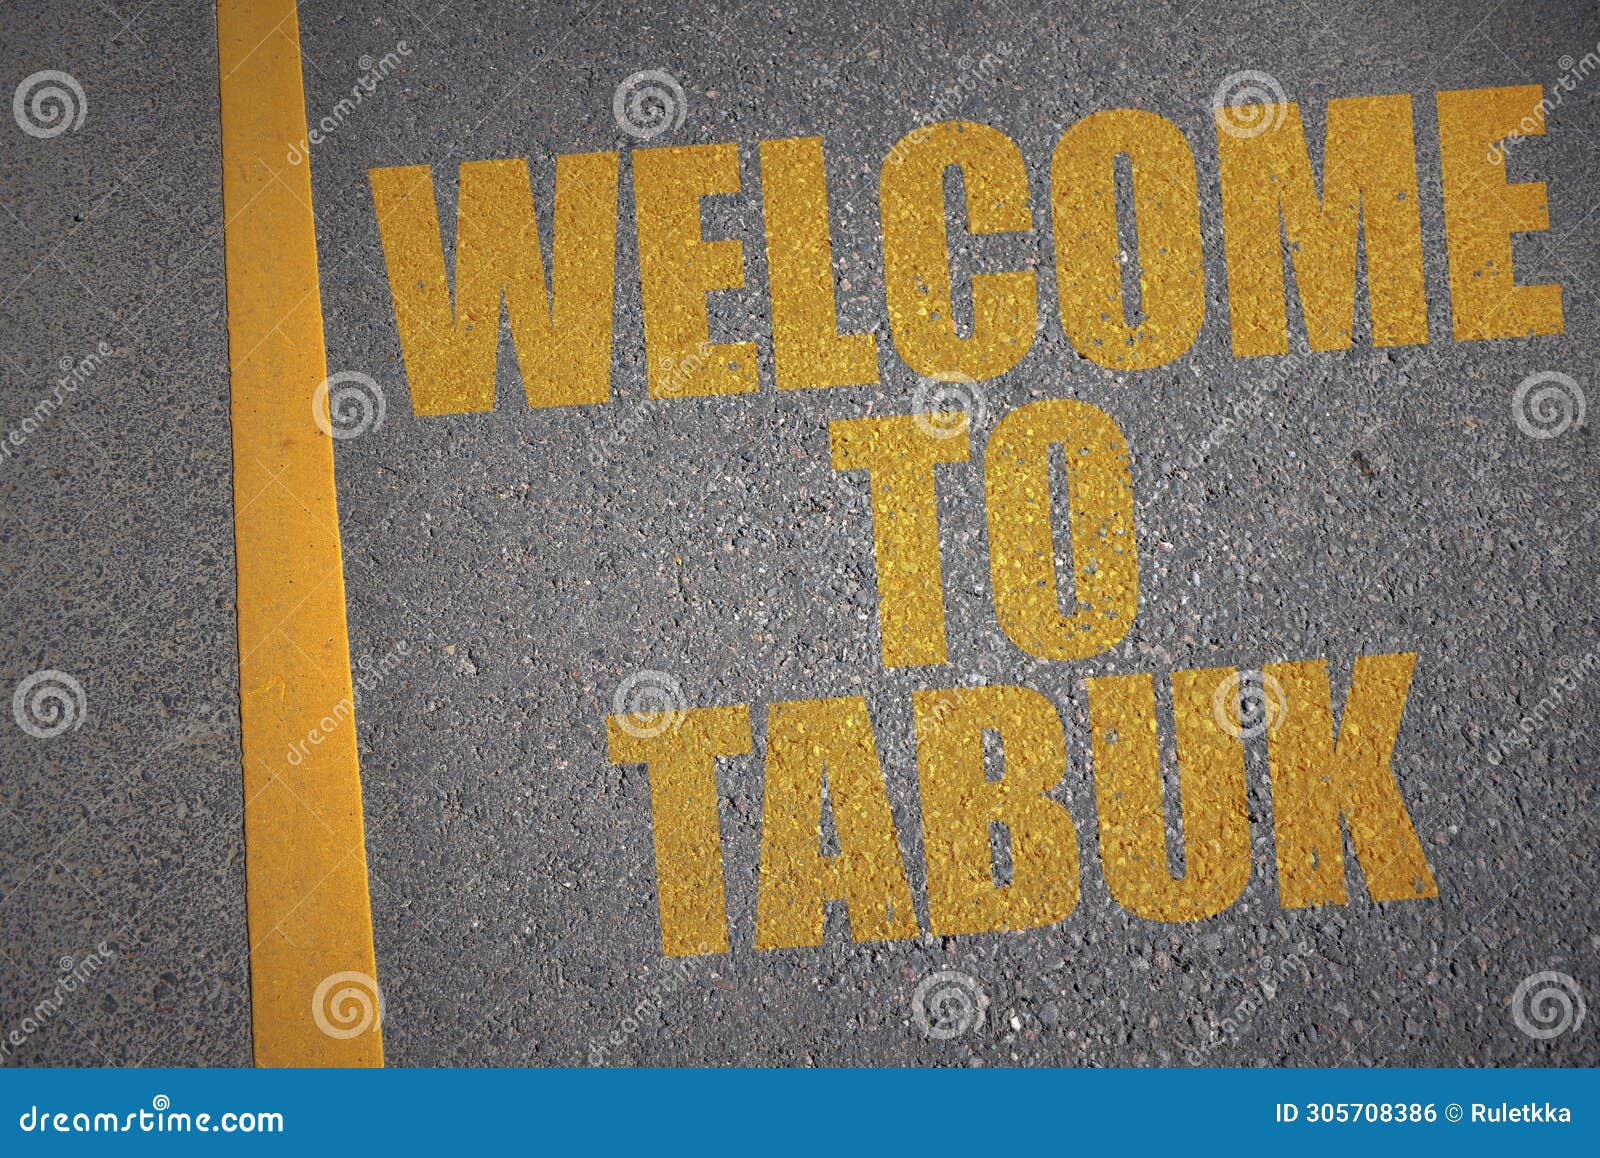 asphalt road with text welcome to tabuk near yellow line